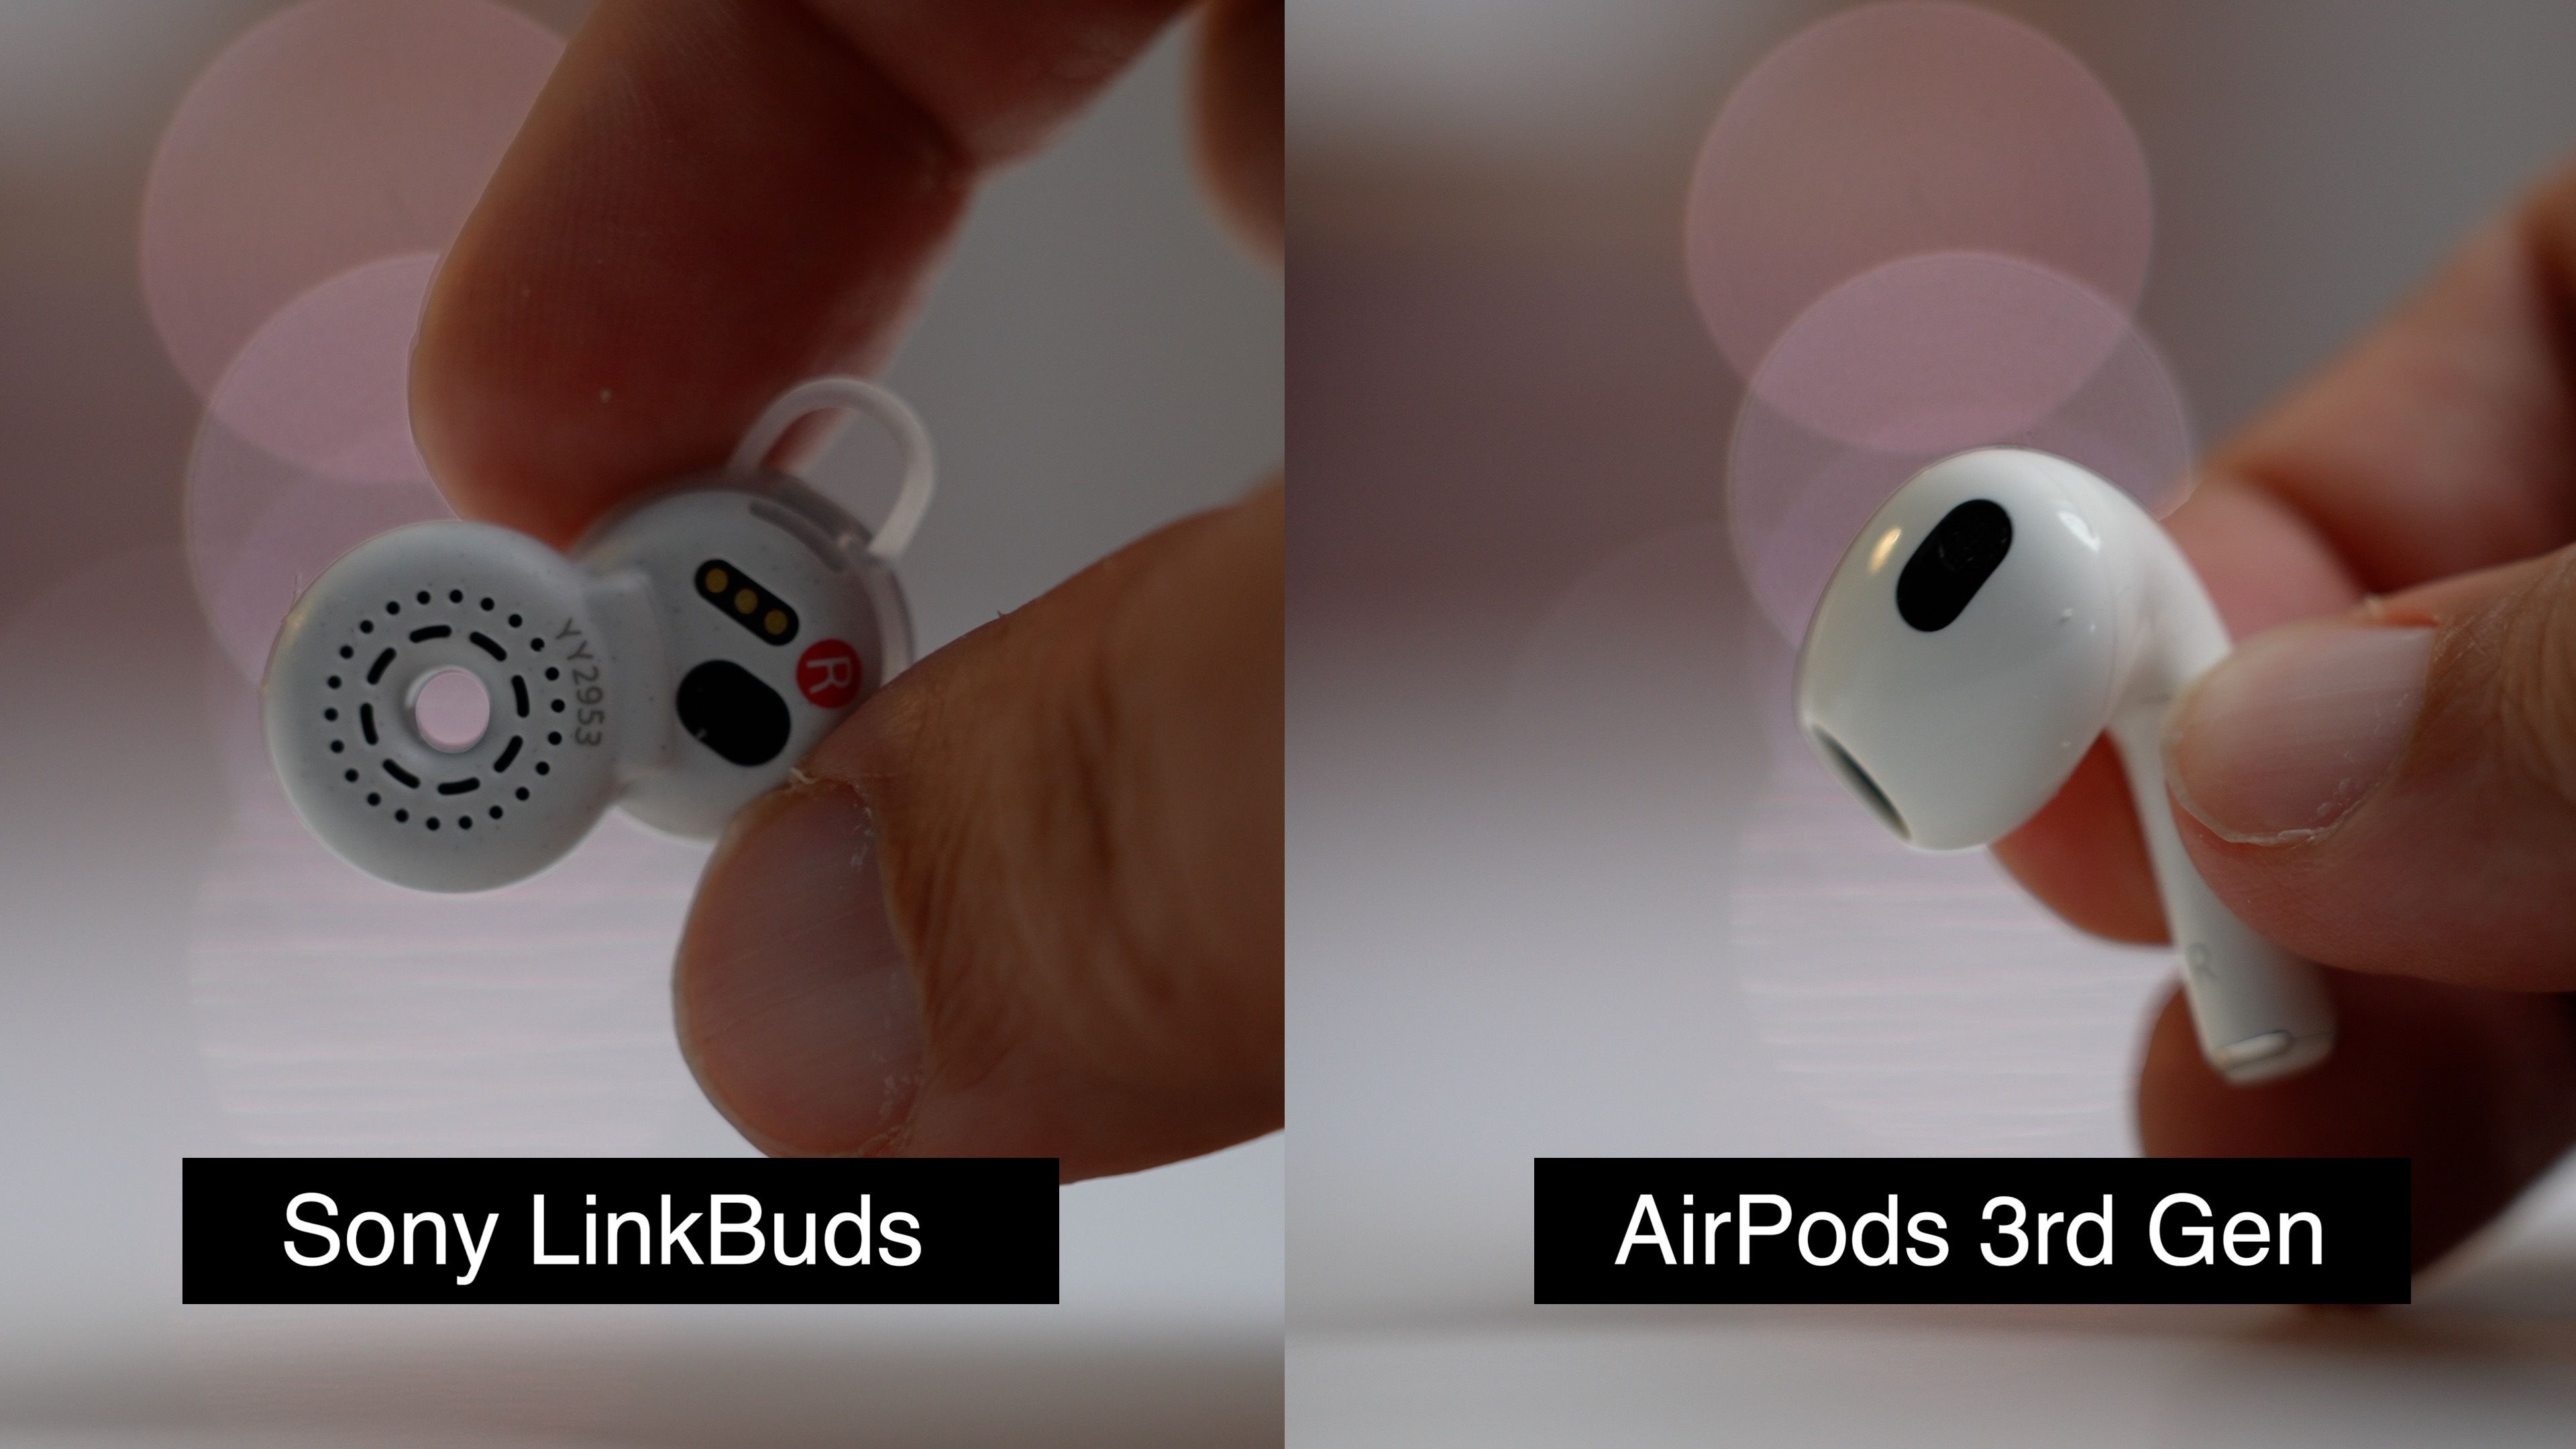 Sony's New LinkBuds vs. Apple's AirPods 3